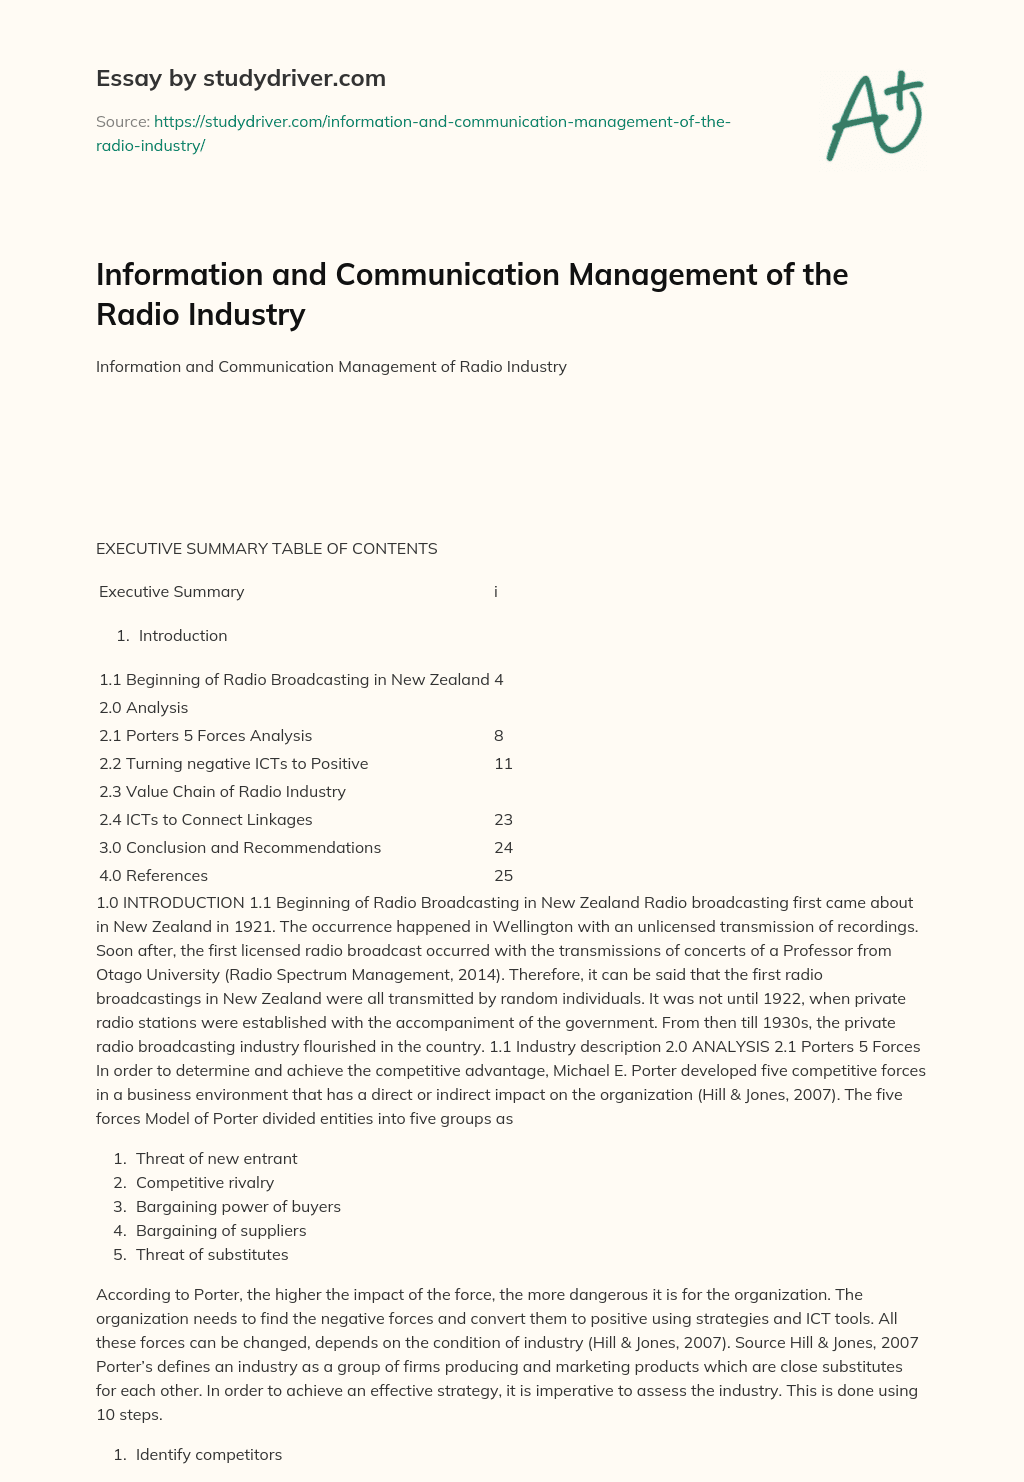 Information and Communication Management of the Radio Industry essay